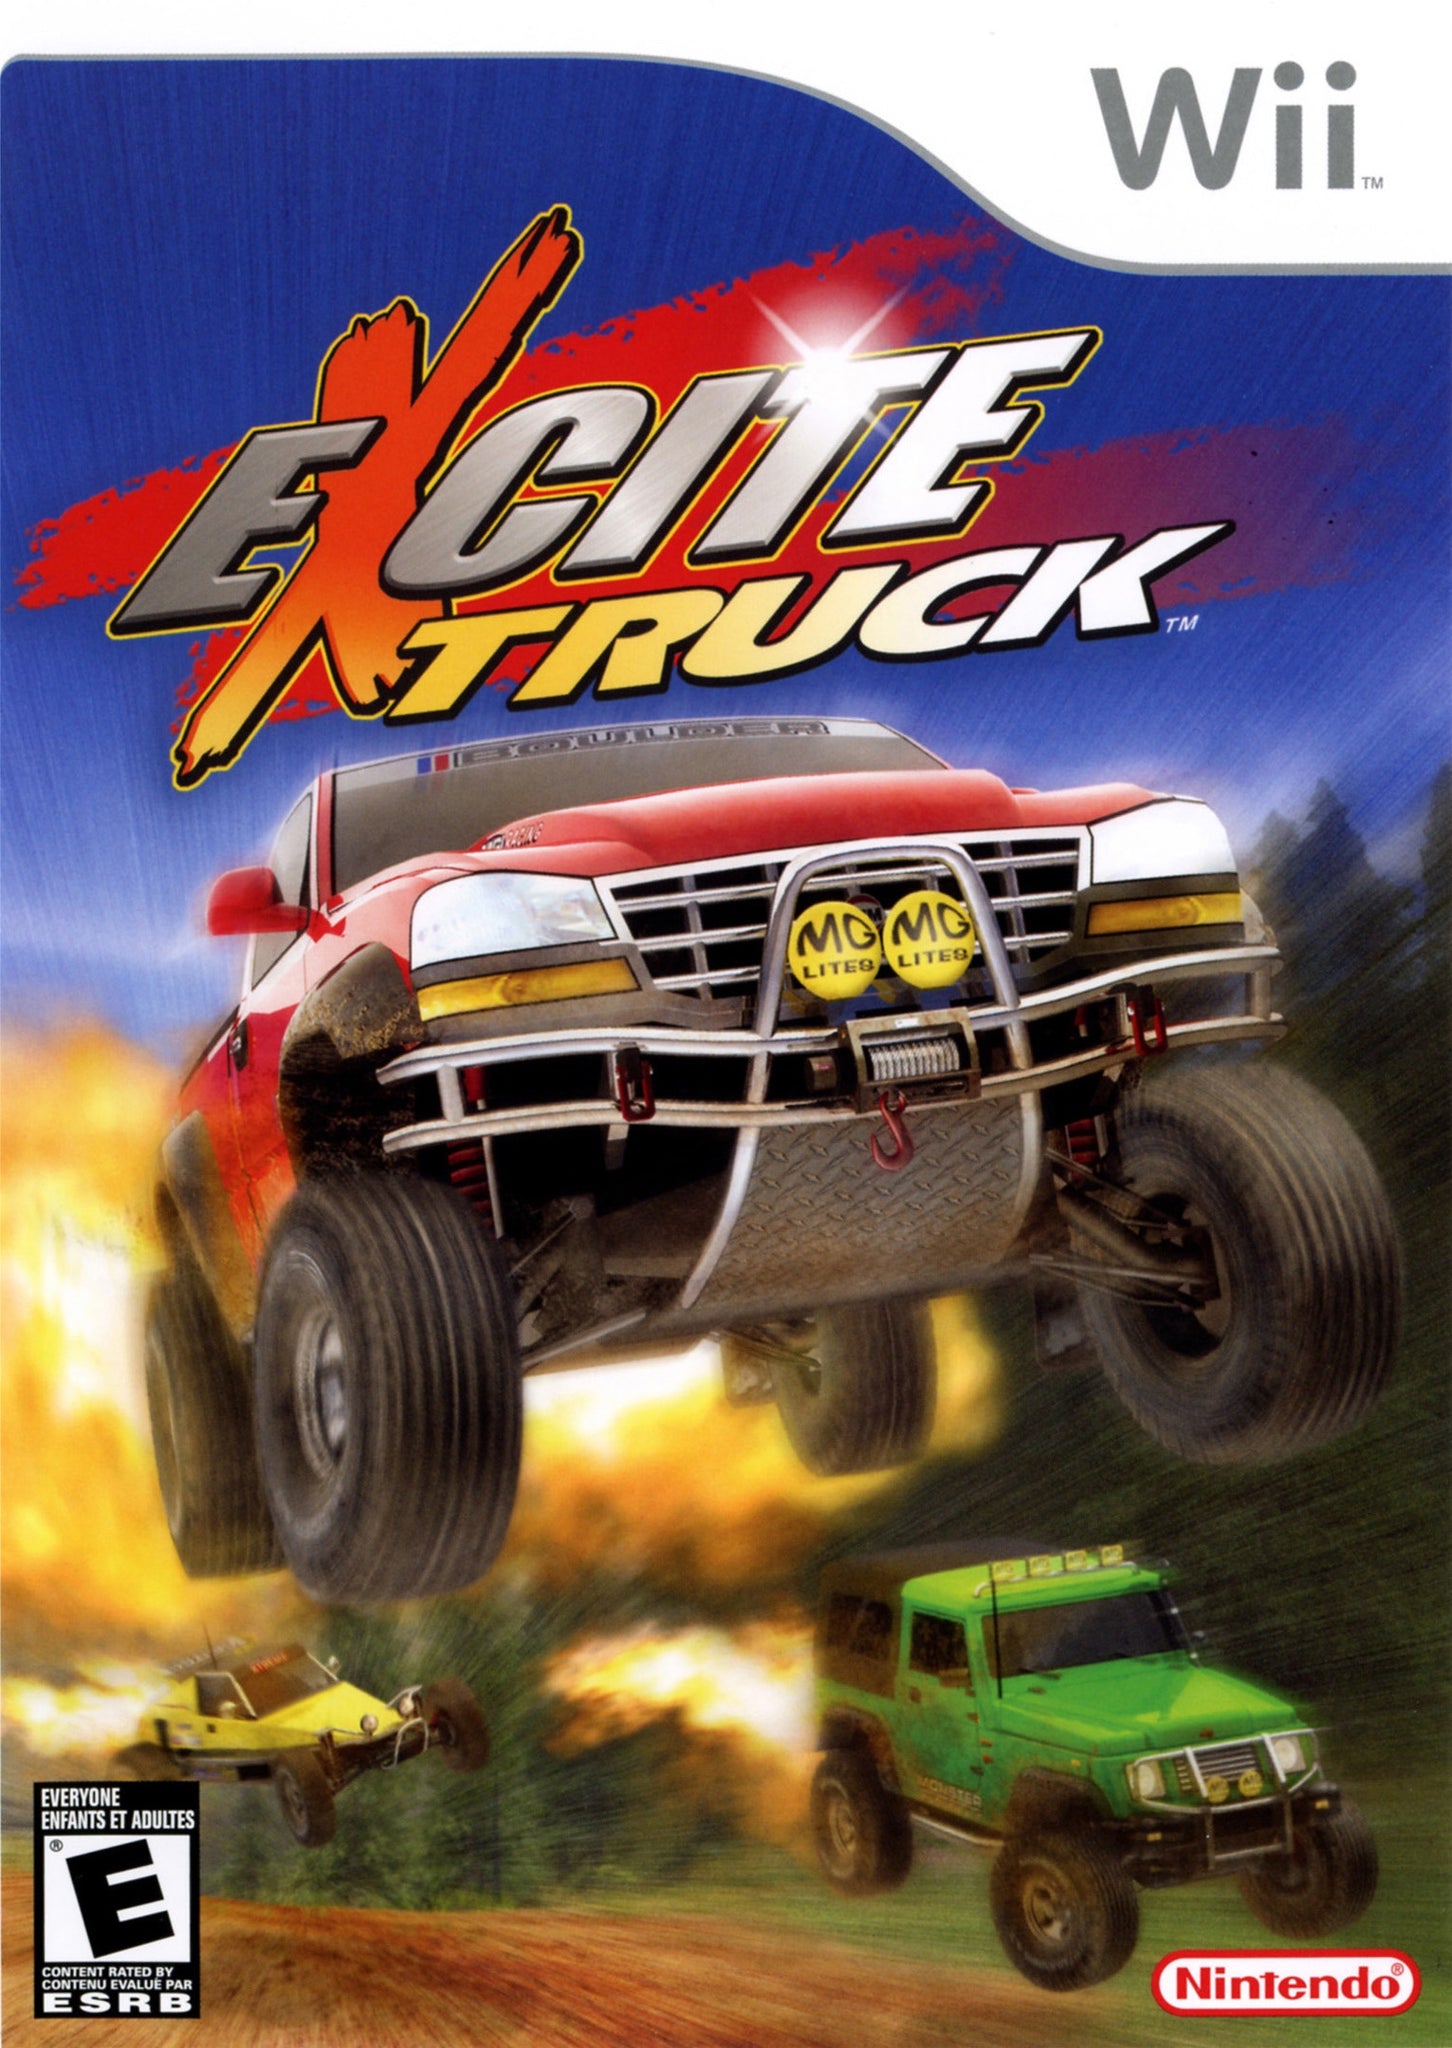 Excite Truck - Wii (Pre-owned)